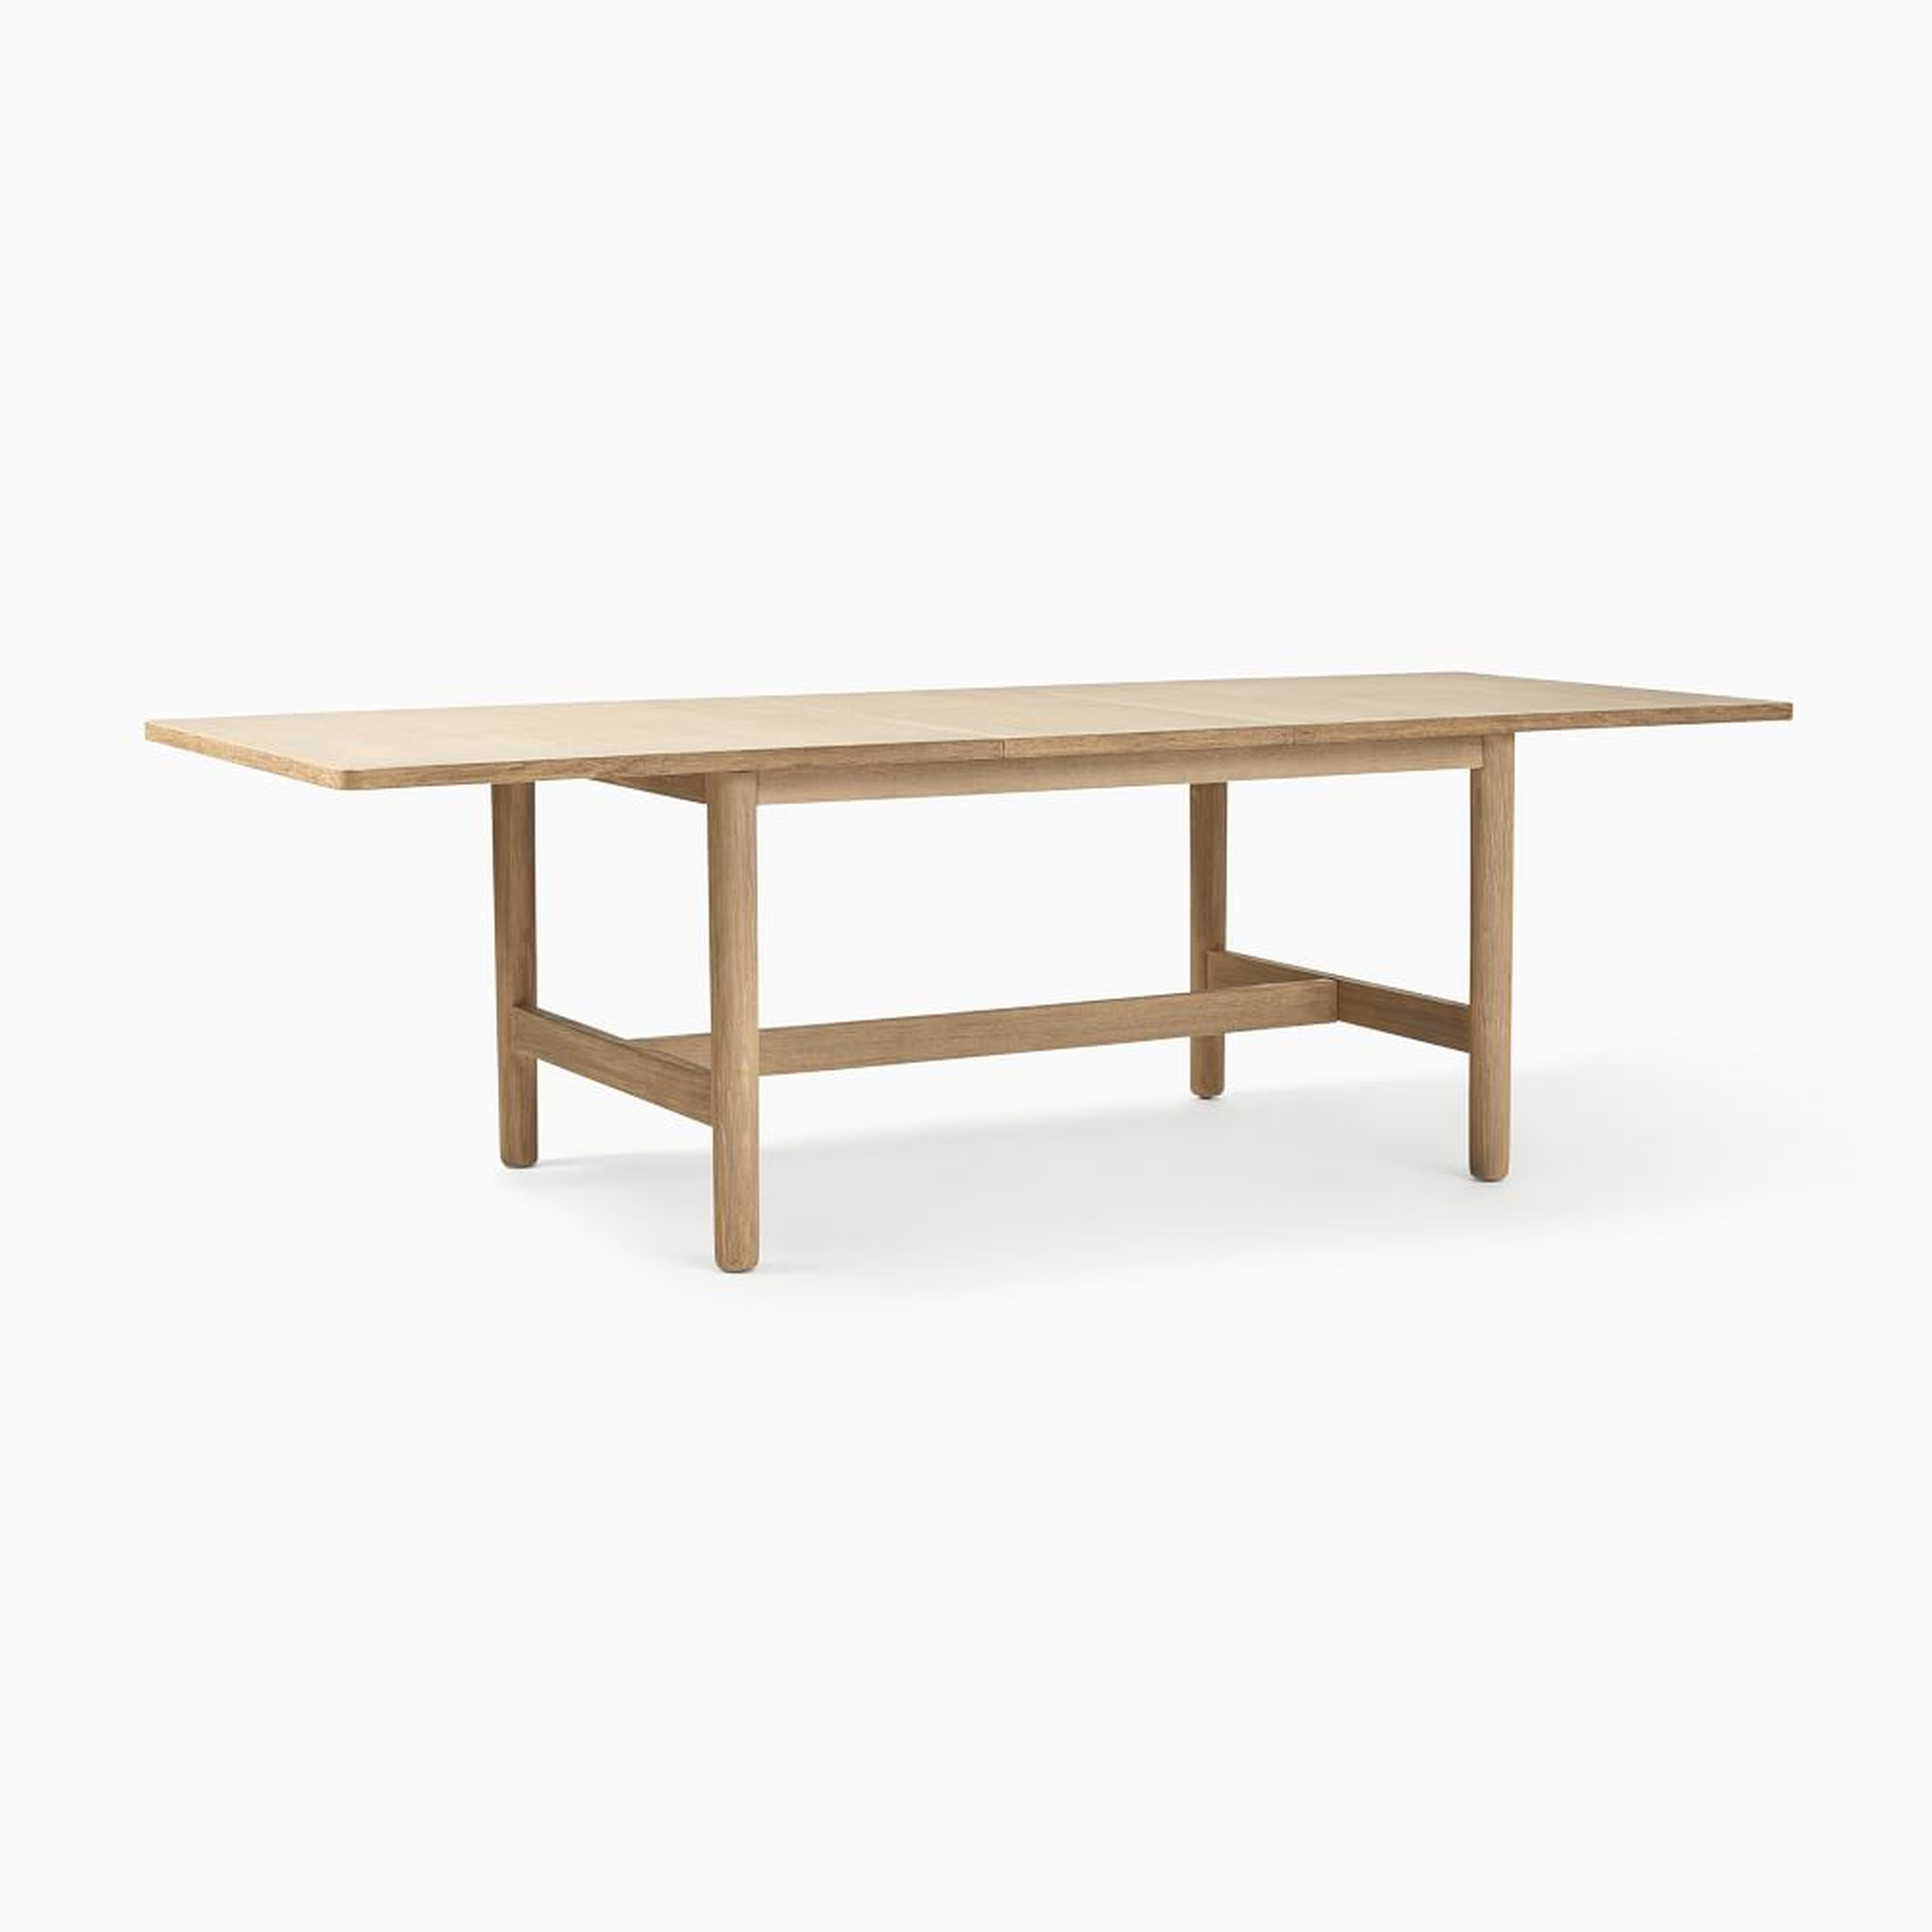 Hargrove 80"-100" Expandable Dining Table, Dune - West Elm